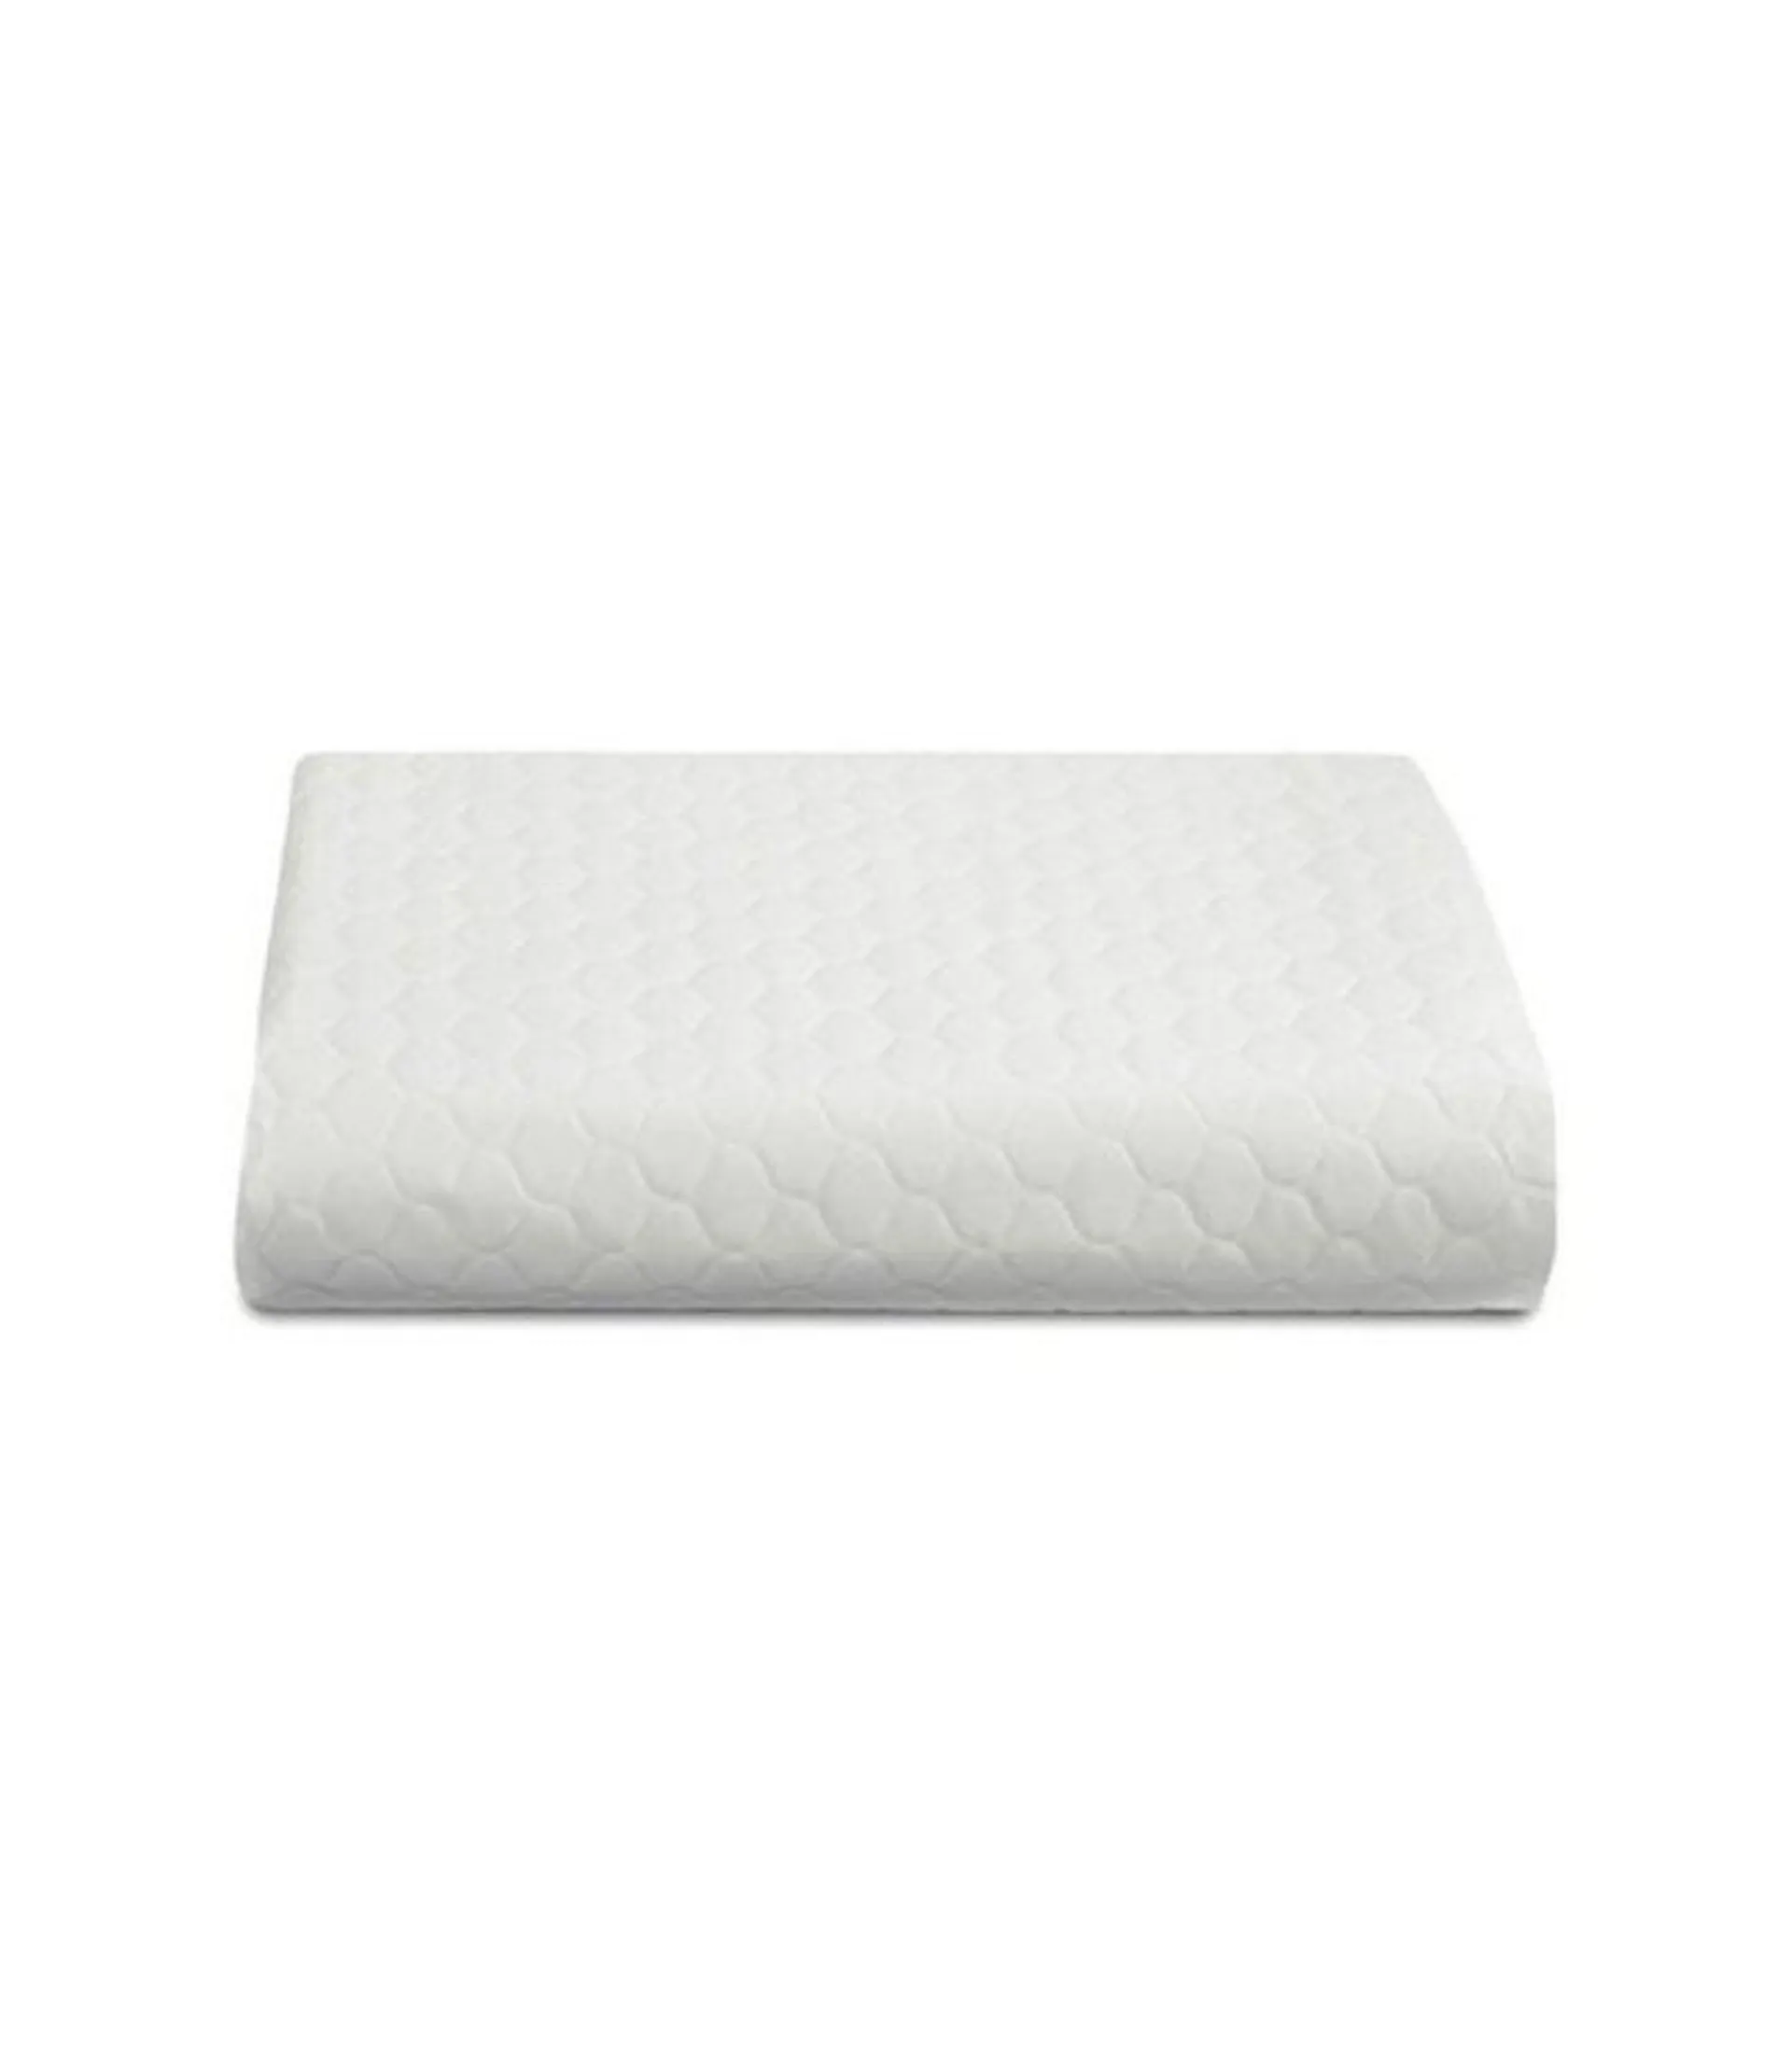 HOTEL QUILTED TABLE PROTECTOR